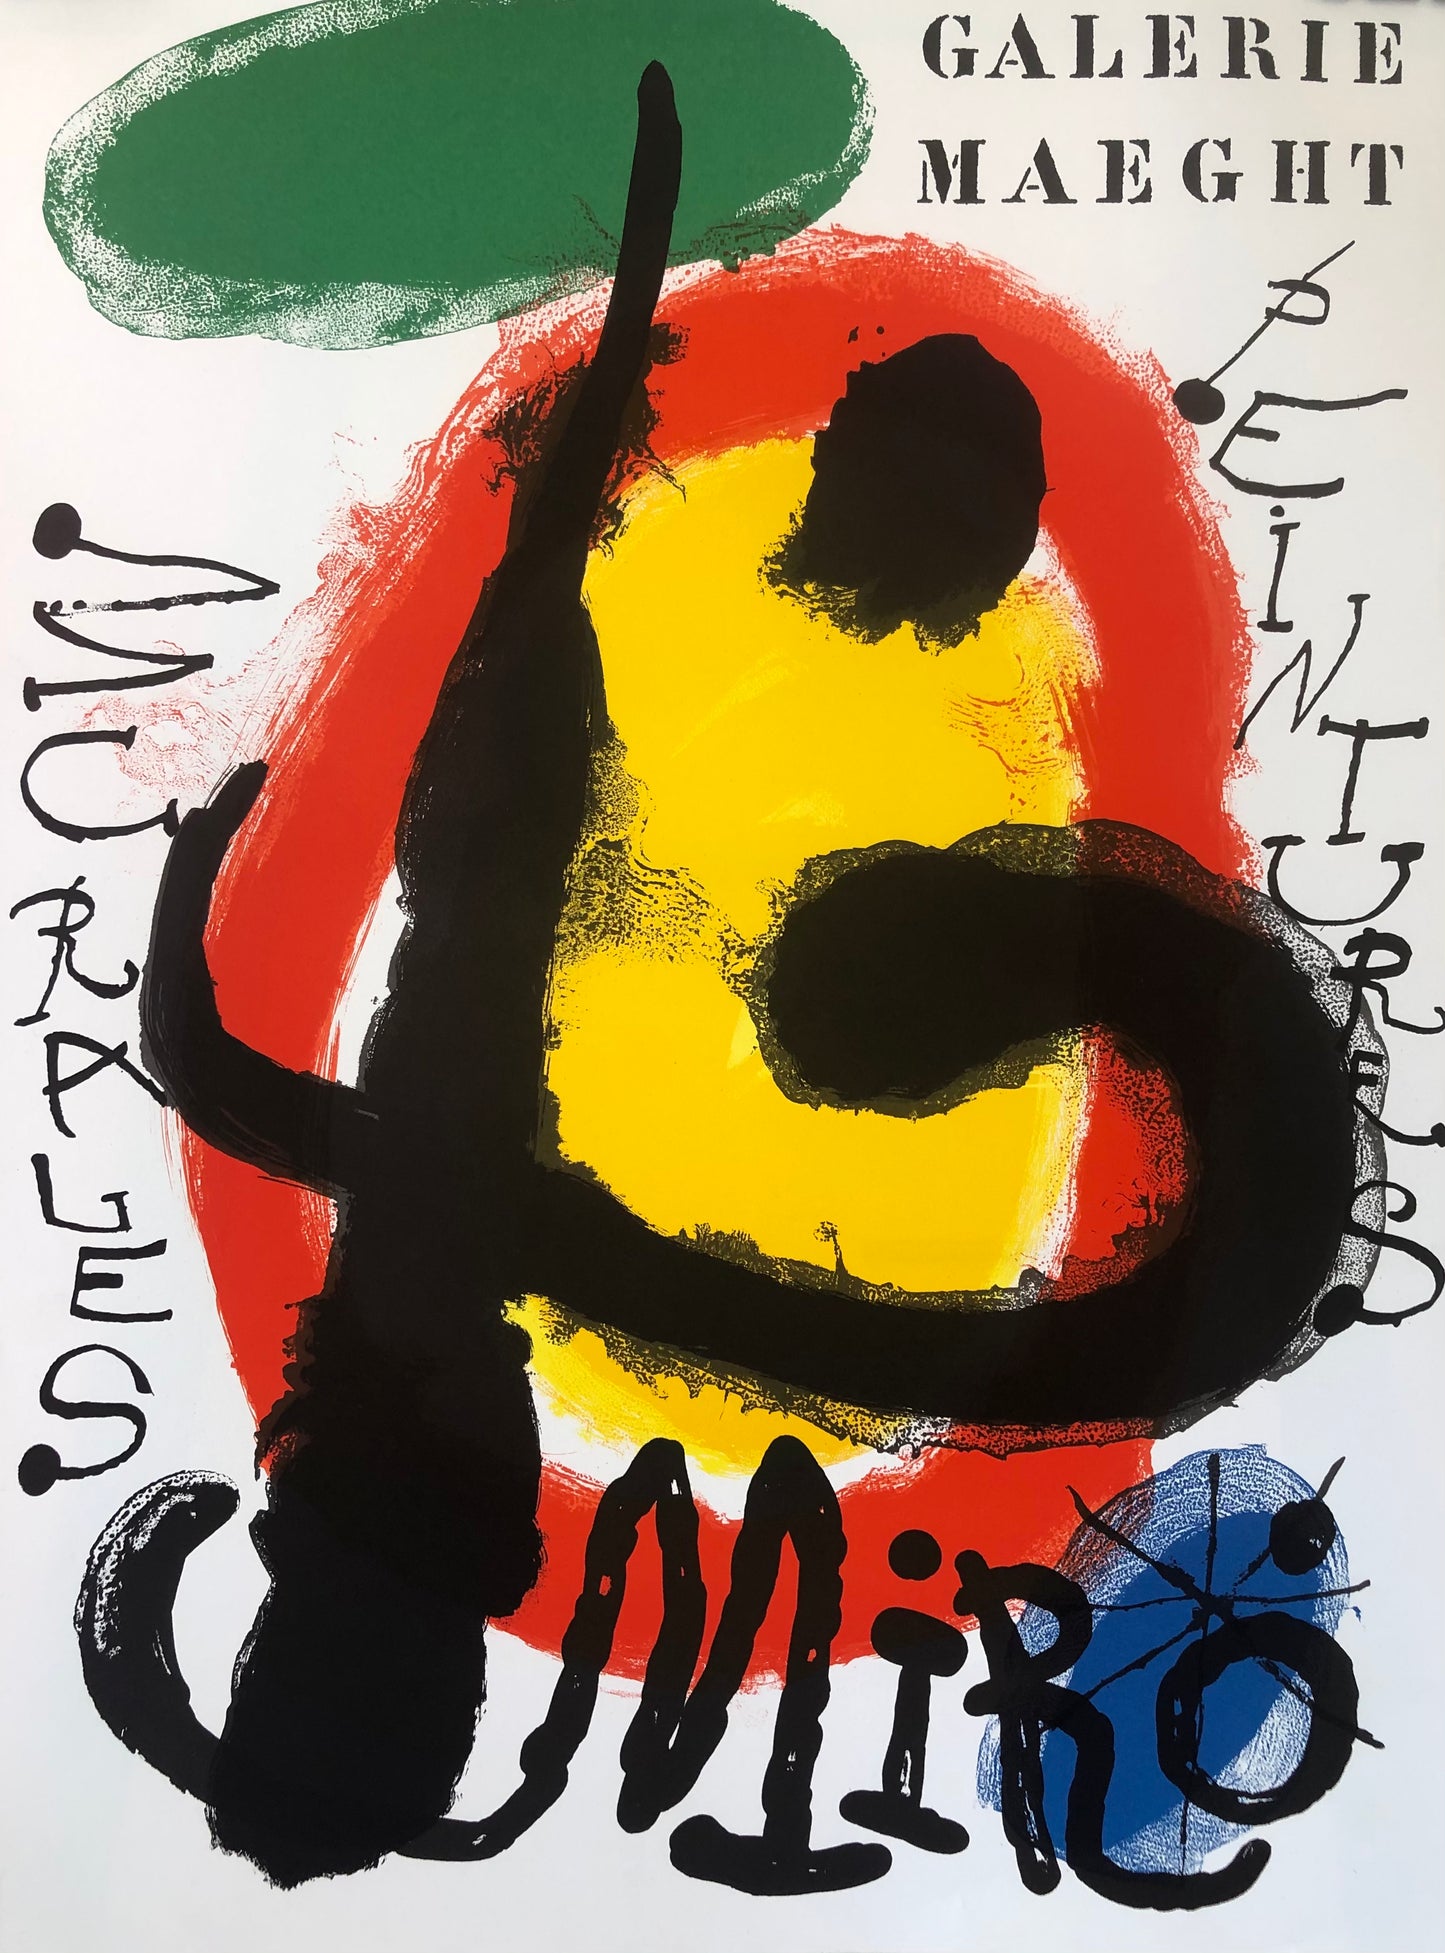 Galerie Maeght Miro Exhibition Poster